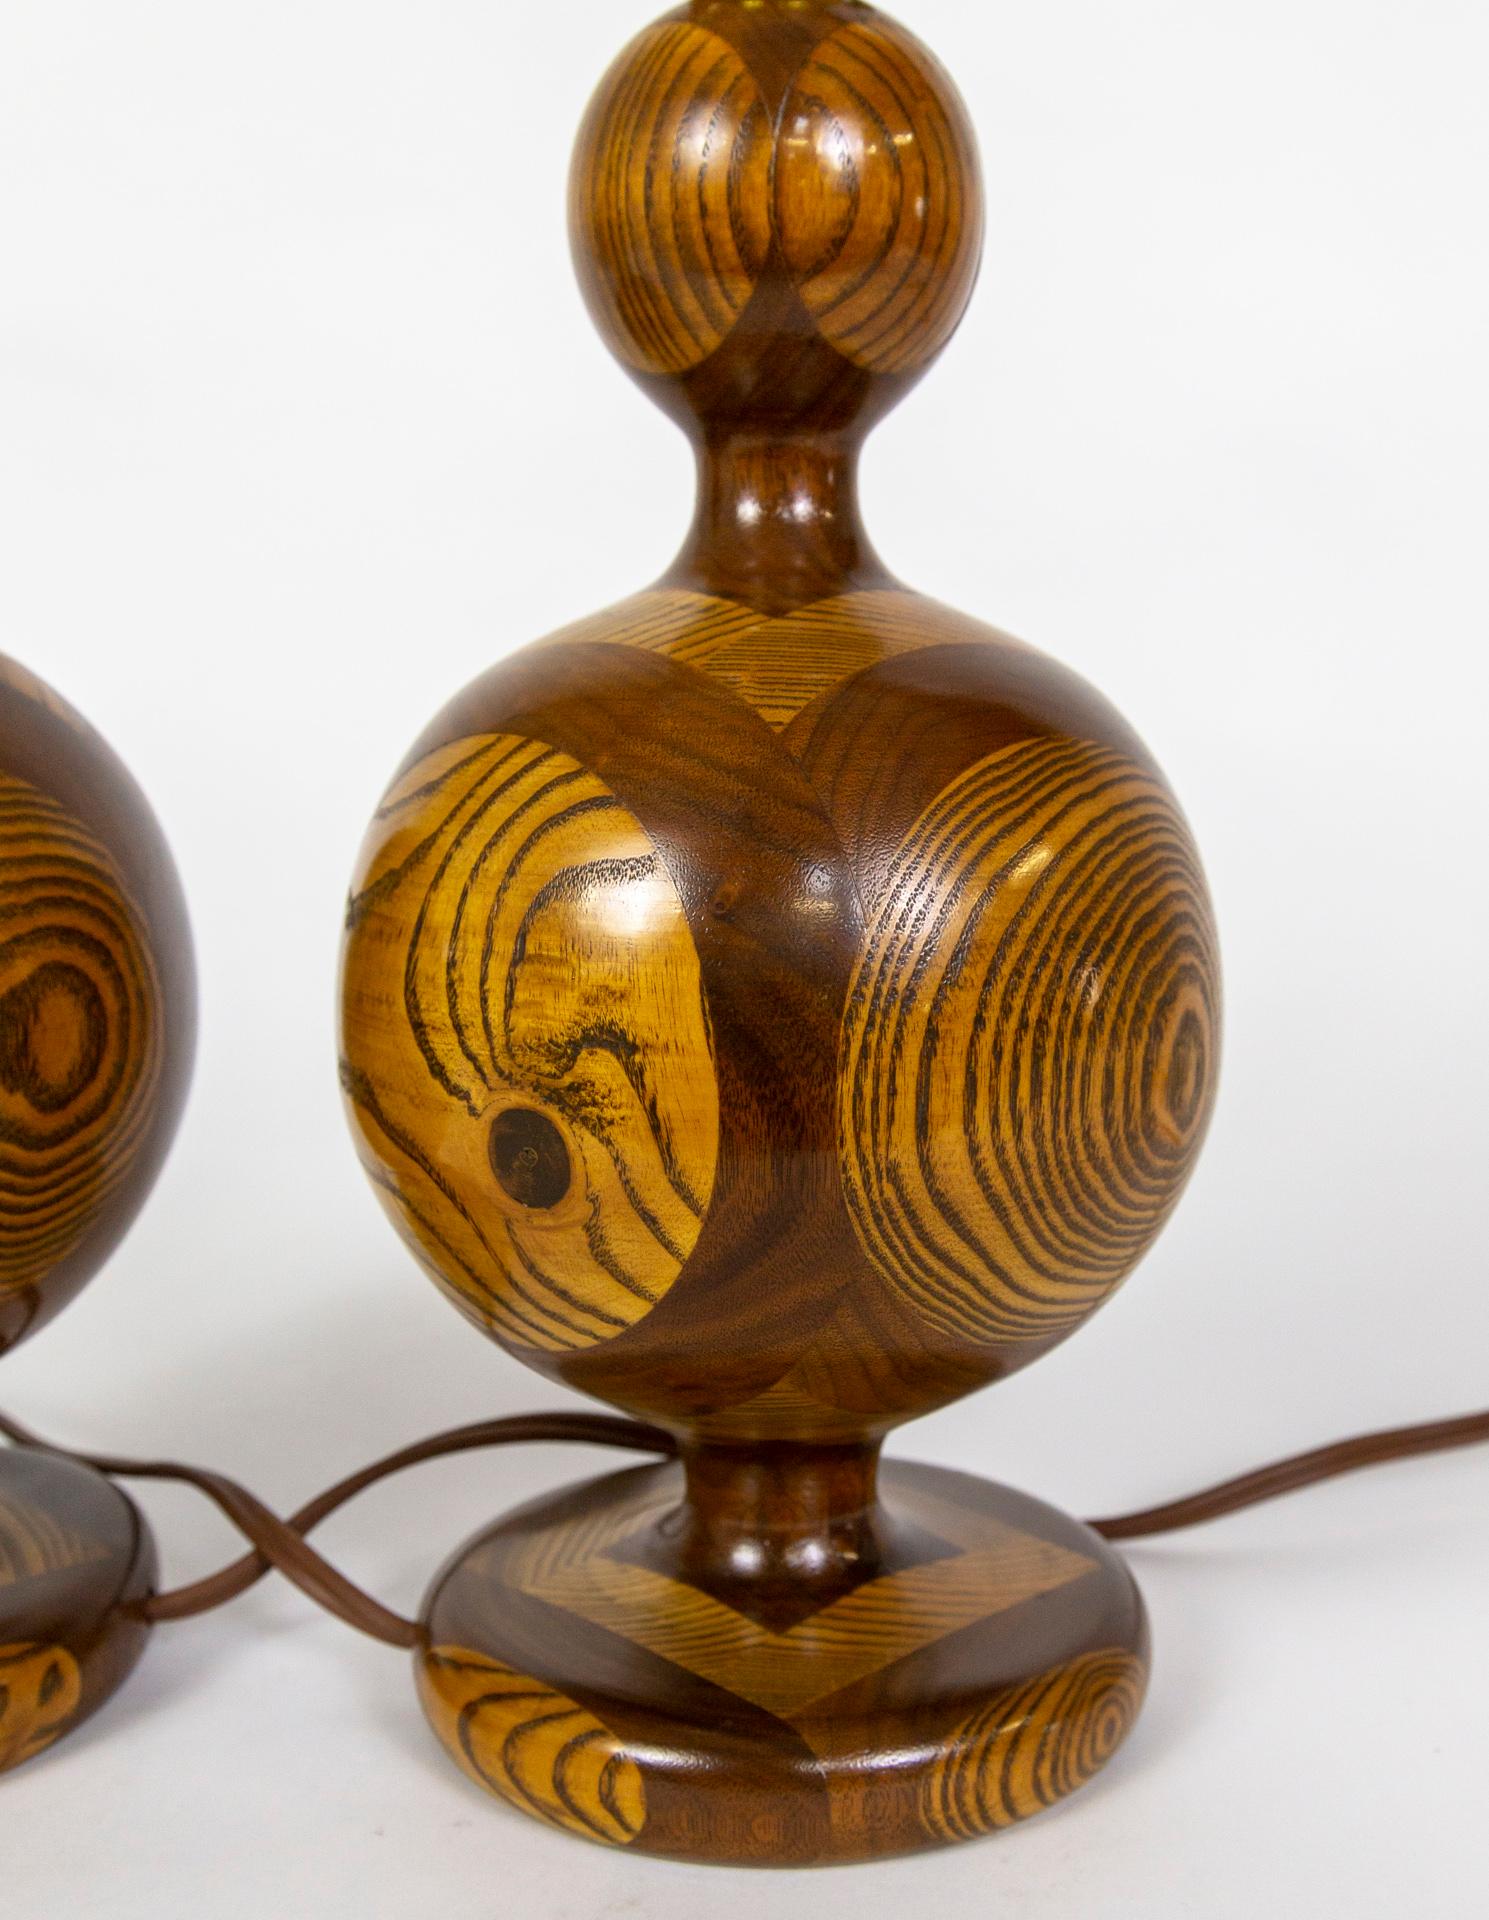 Segmented 'Inlaid-Esque' Turned Walnut/Cherry Wood Lamps, Pair 5